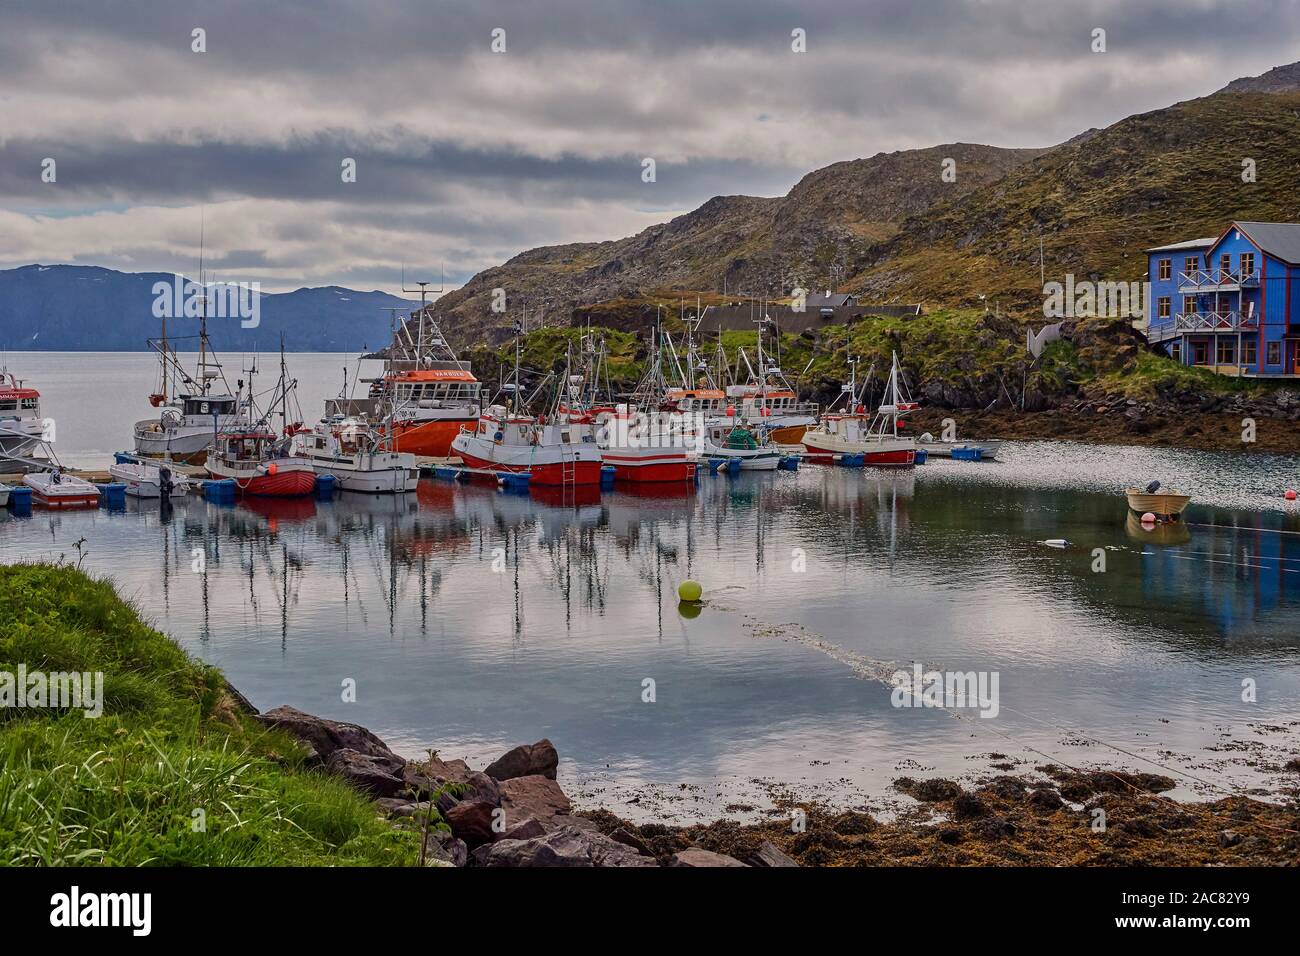 Kamoyvær is a fishing village in Nordkapp Municipality in Finnmark county, Norway. The village lies along the Kamoyfjorden on the east side of the isl Stock Photo